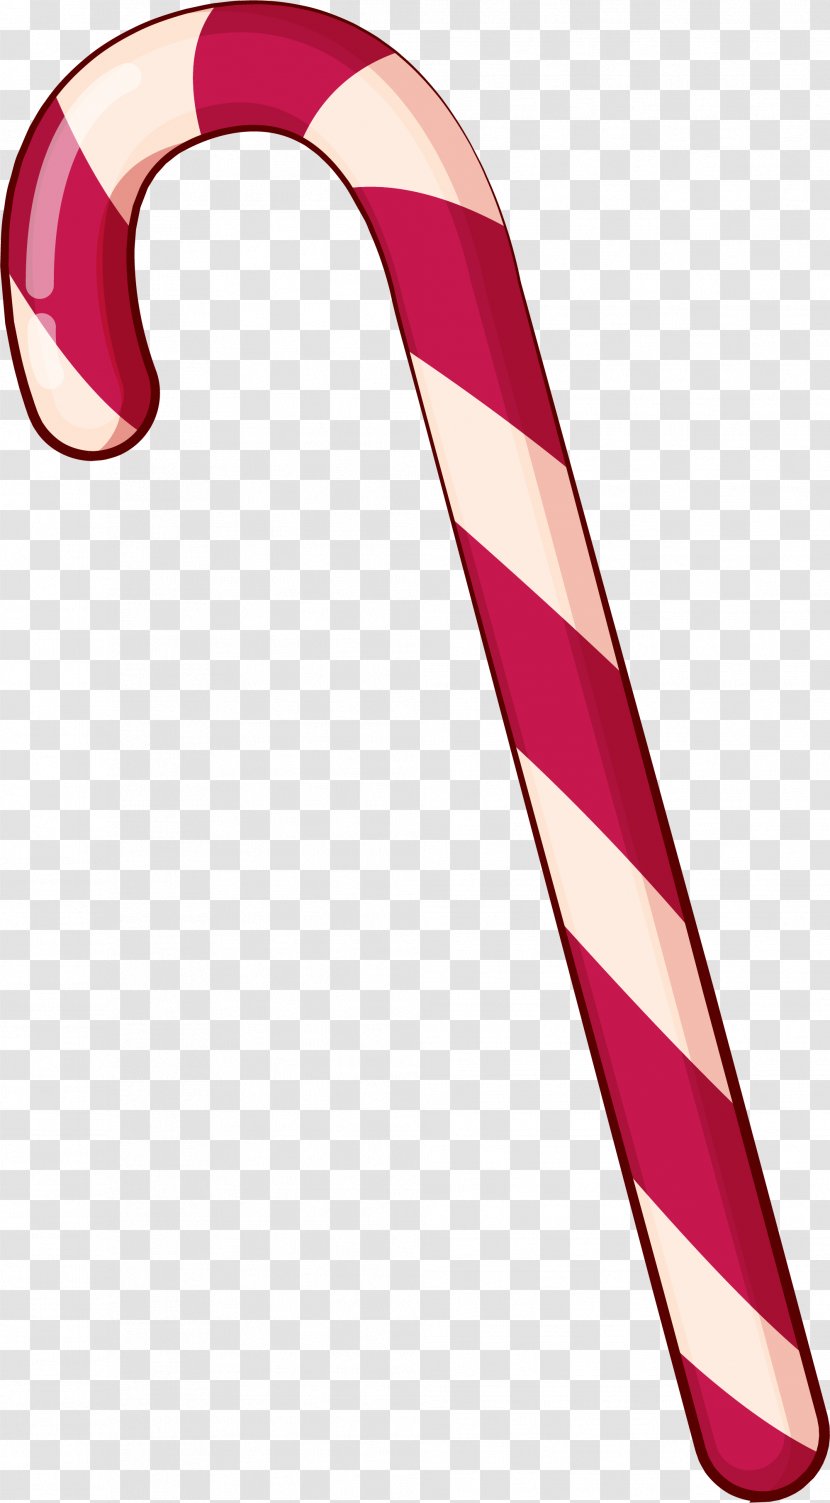 Stick Candy Cane - Little Fresh Red Transparent PNG